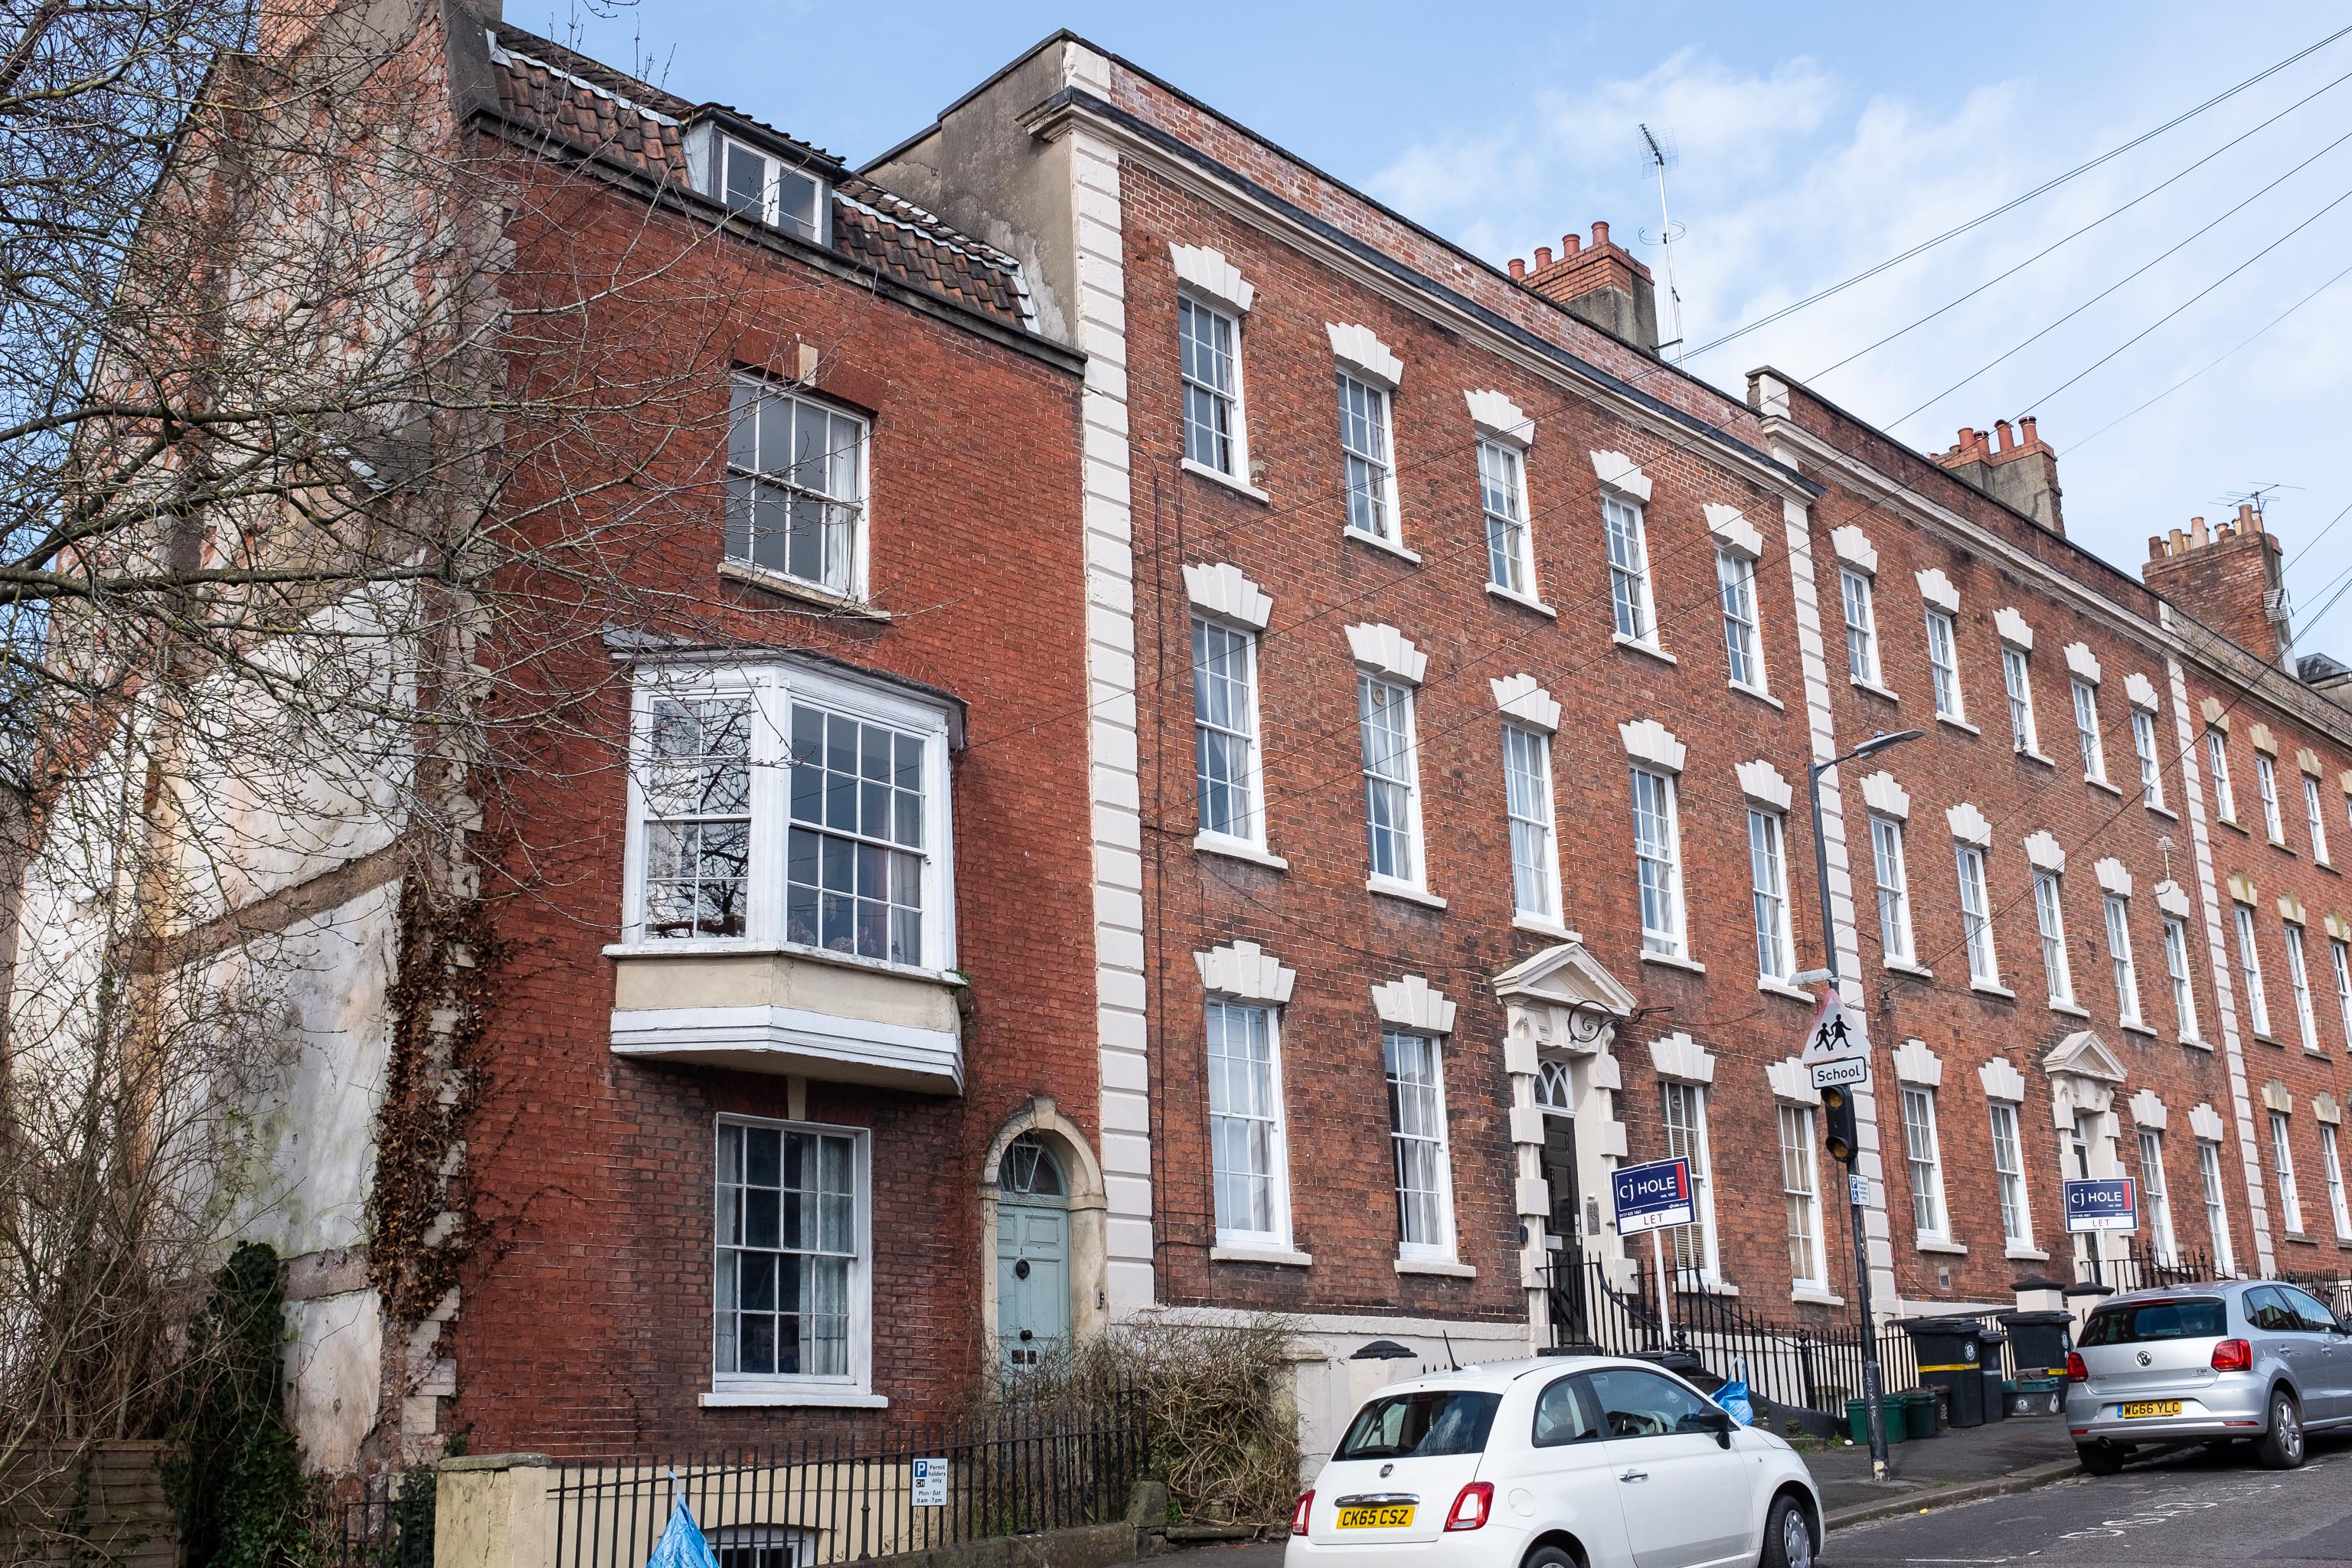 
                                One of These Kids Is Doing His Own Thing

                                                                    One Albermarle Row. The entire terrace is Grade II* listed apart from number 1, which is clearly a later addition, and merely Grade II listed. It m...
                                                                